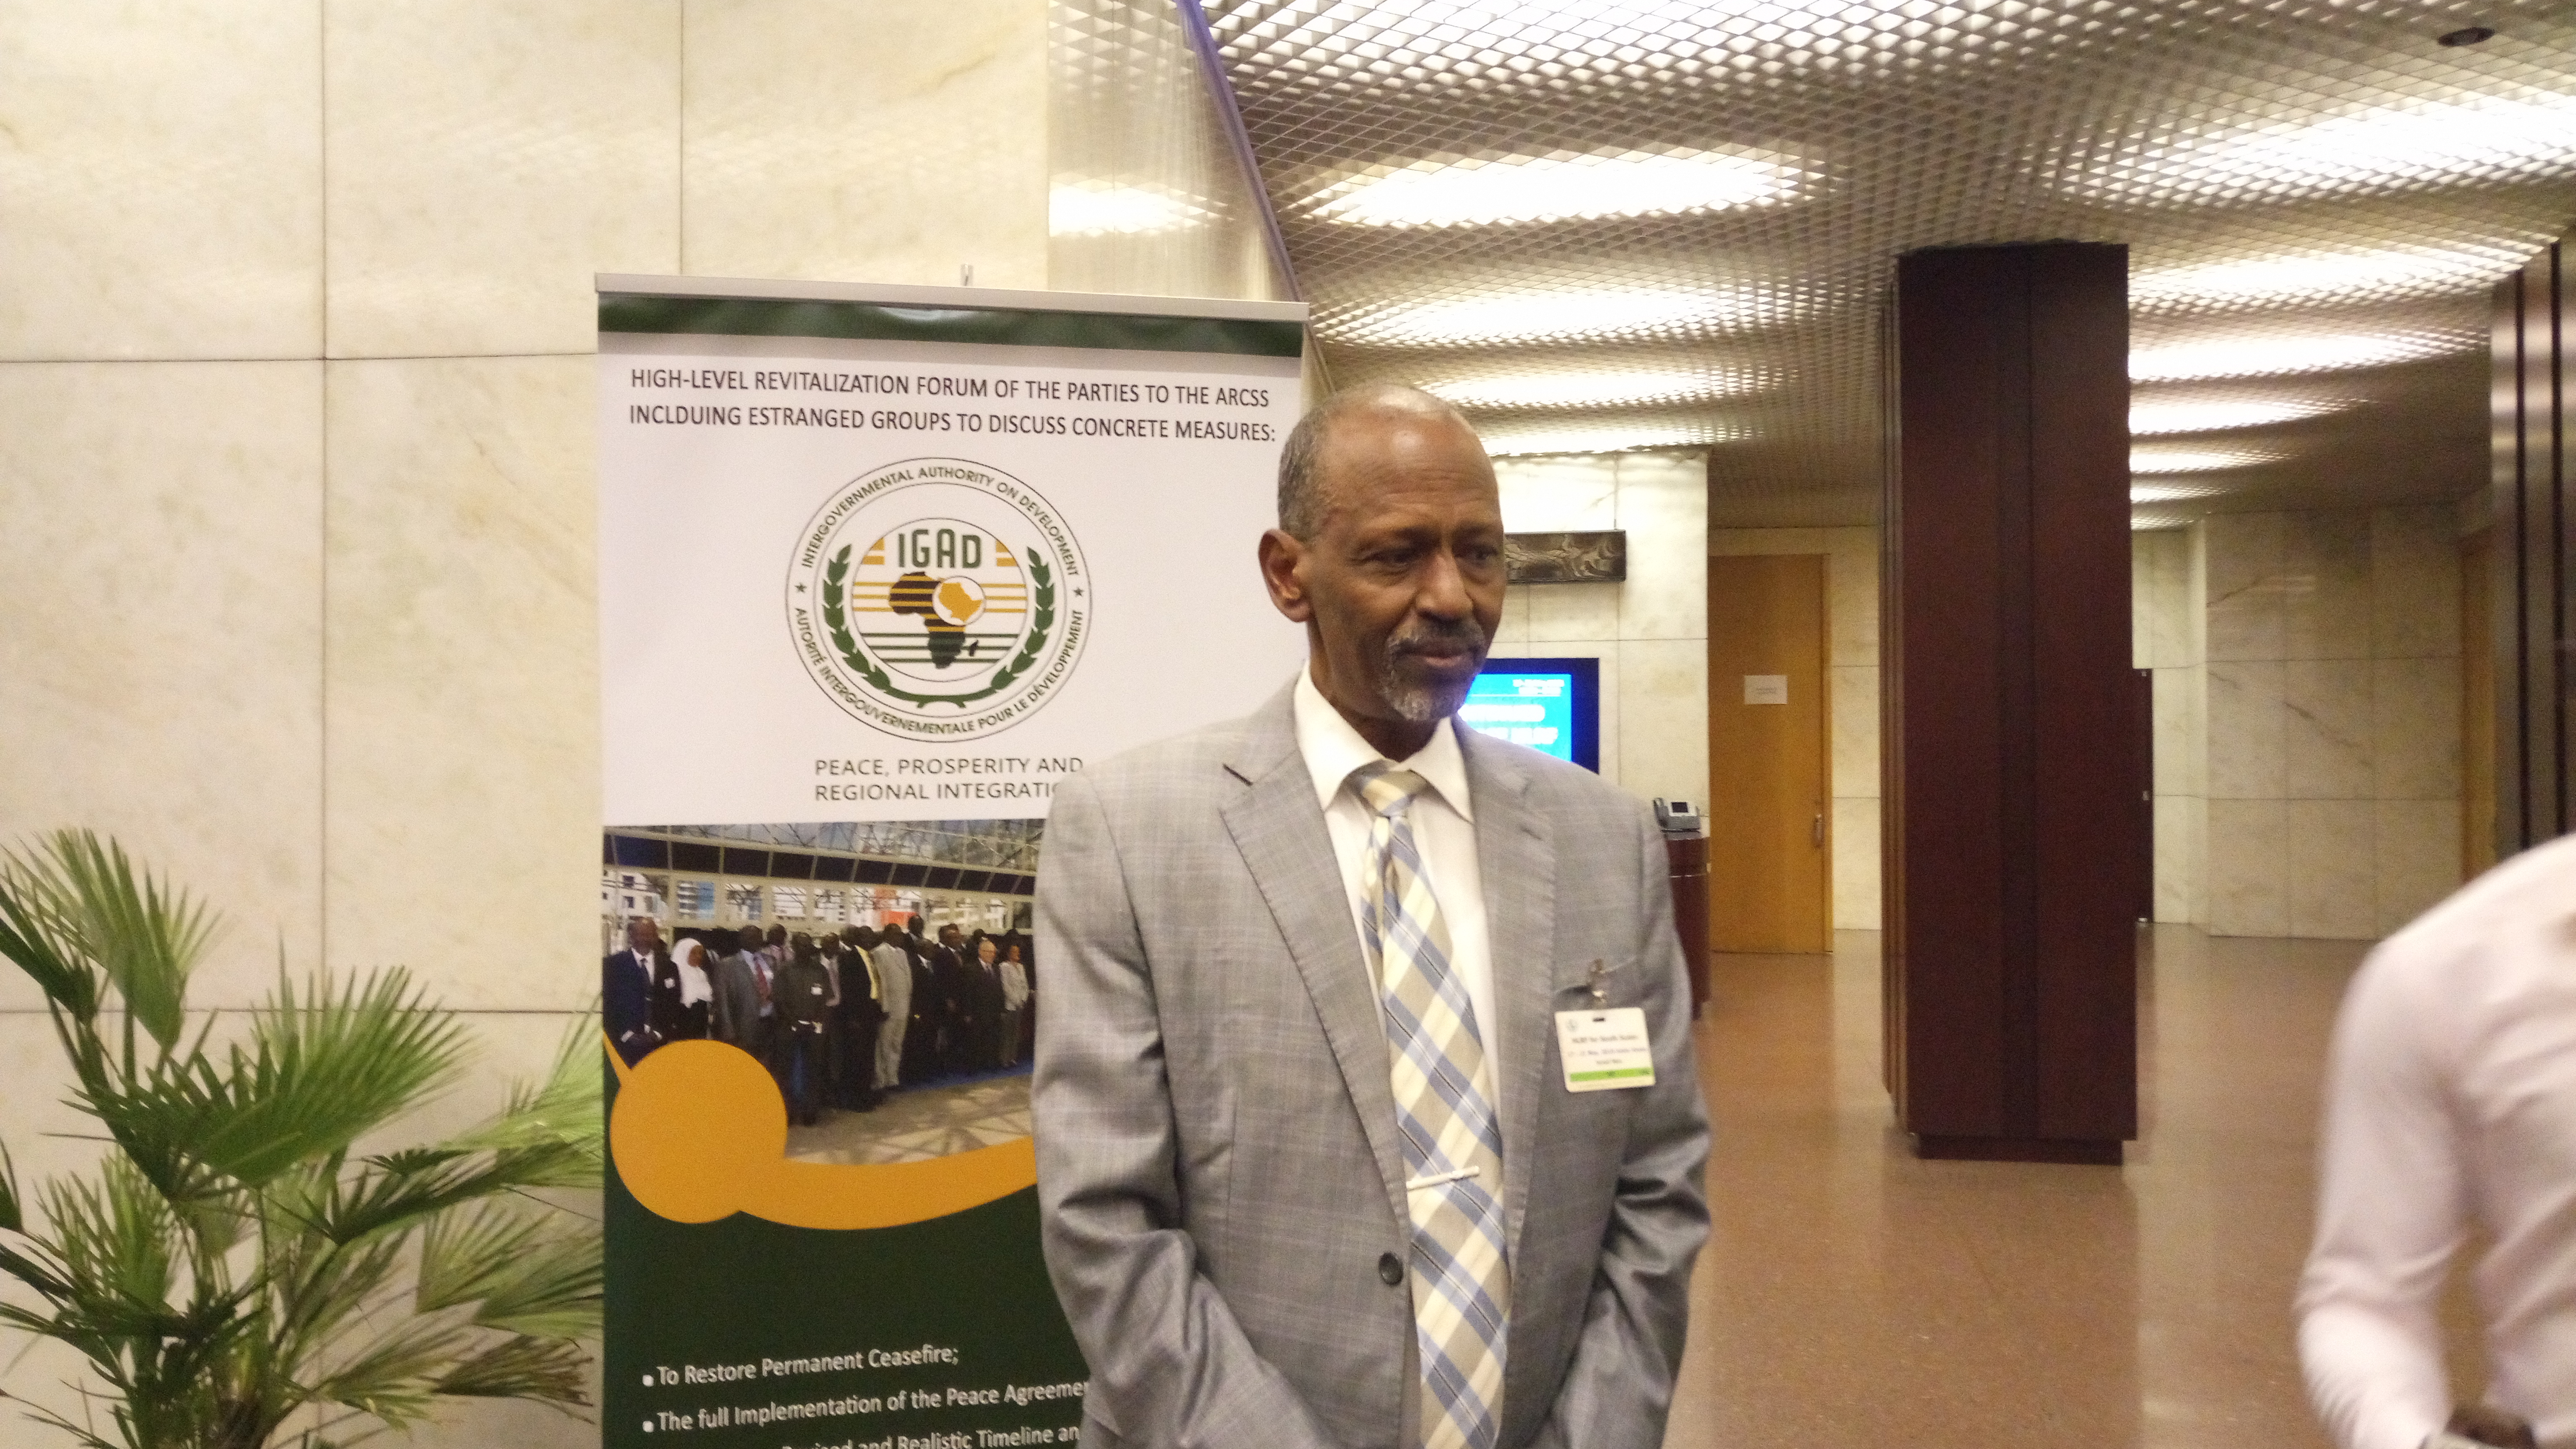 IGAD requests for consultation with HLRF parties